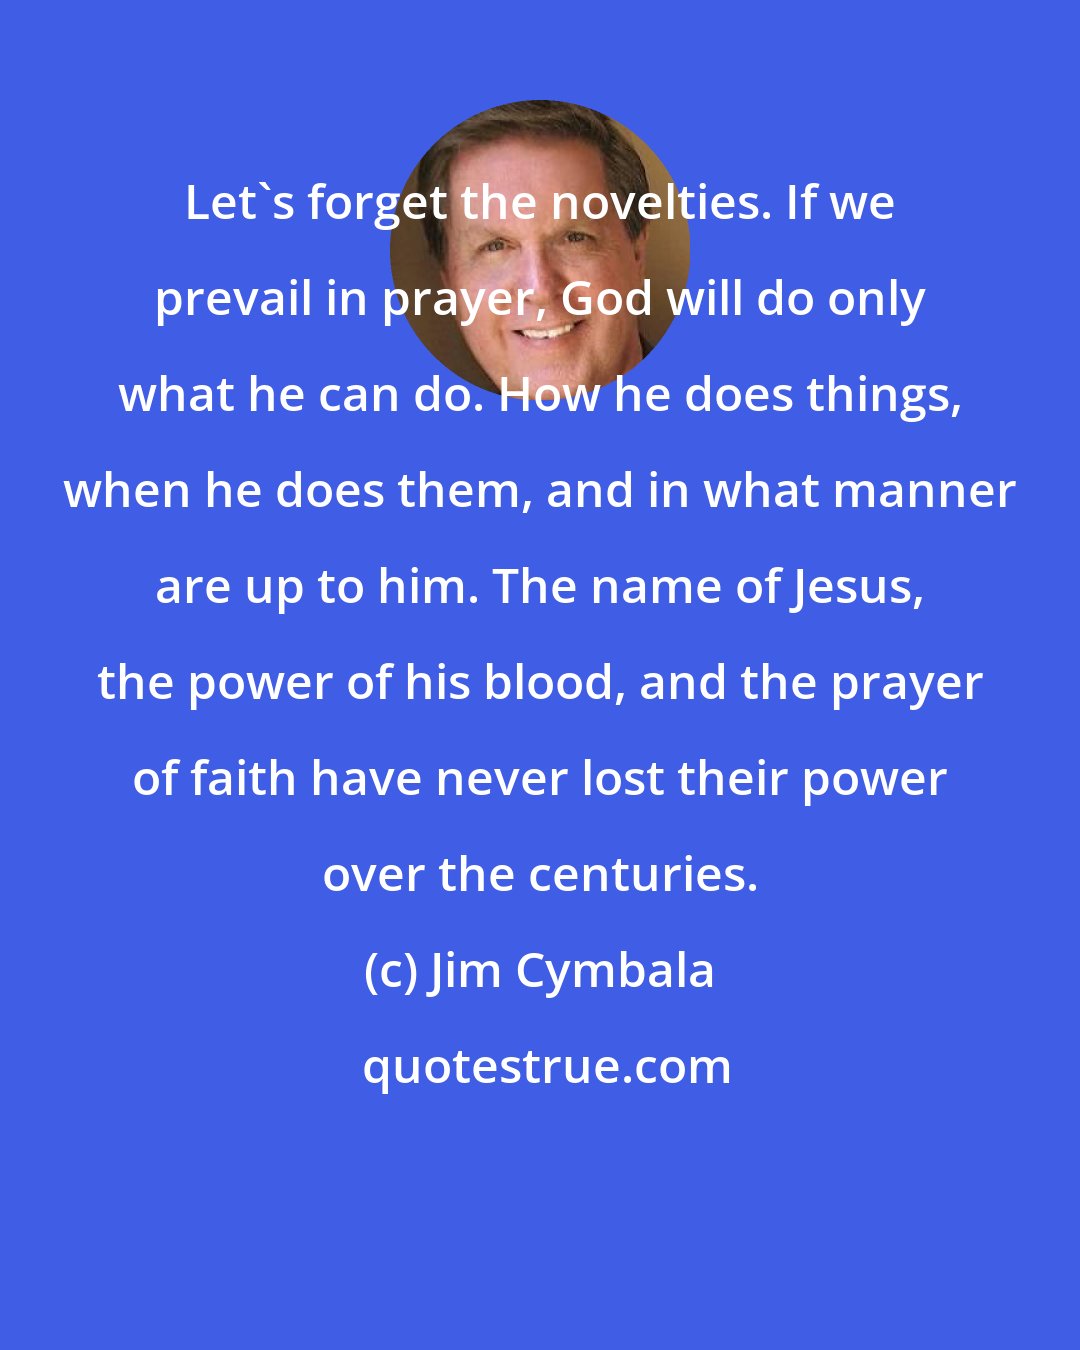 Jim Cymbala: Let's forget the novelties. If we prevail in prayer, God will do only what he can do. How he does things, when he does them, and in what manner are up to him. The name of Jesus, the power of his blood, and the prayer of faith have never lost their power over the centuries.